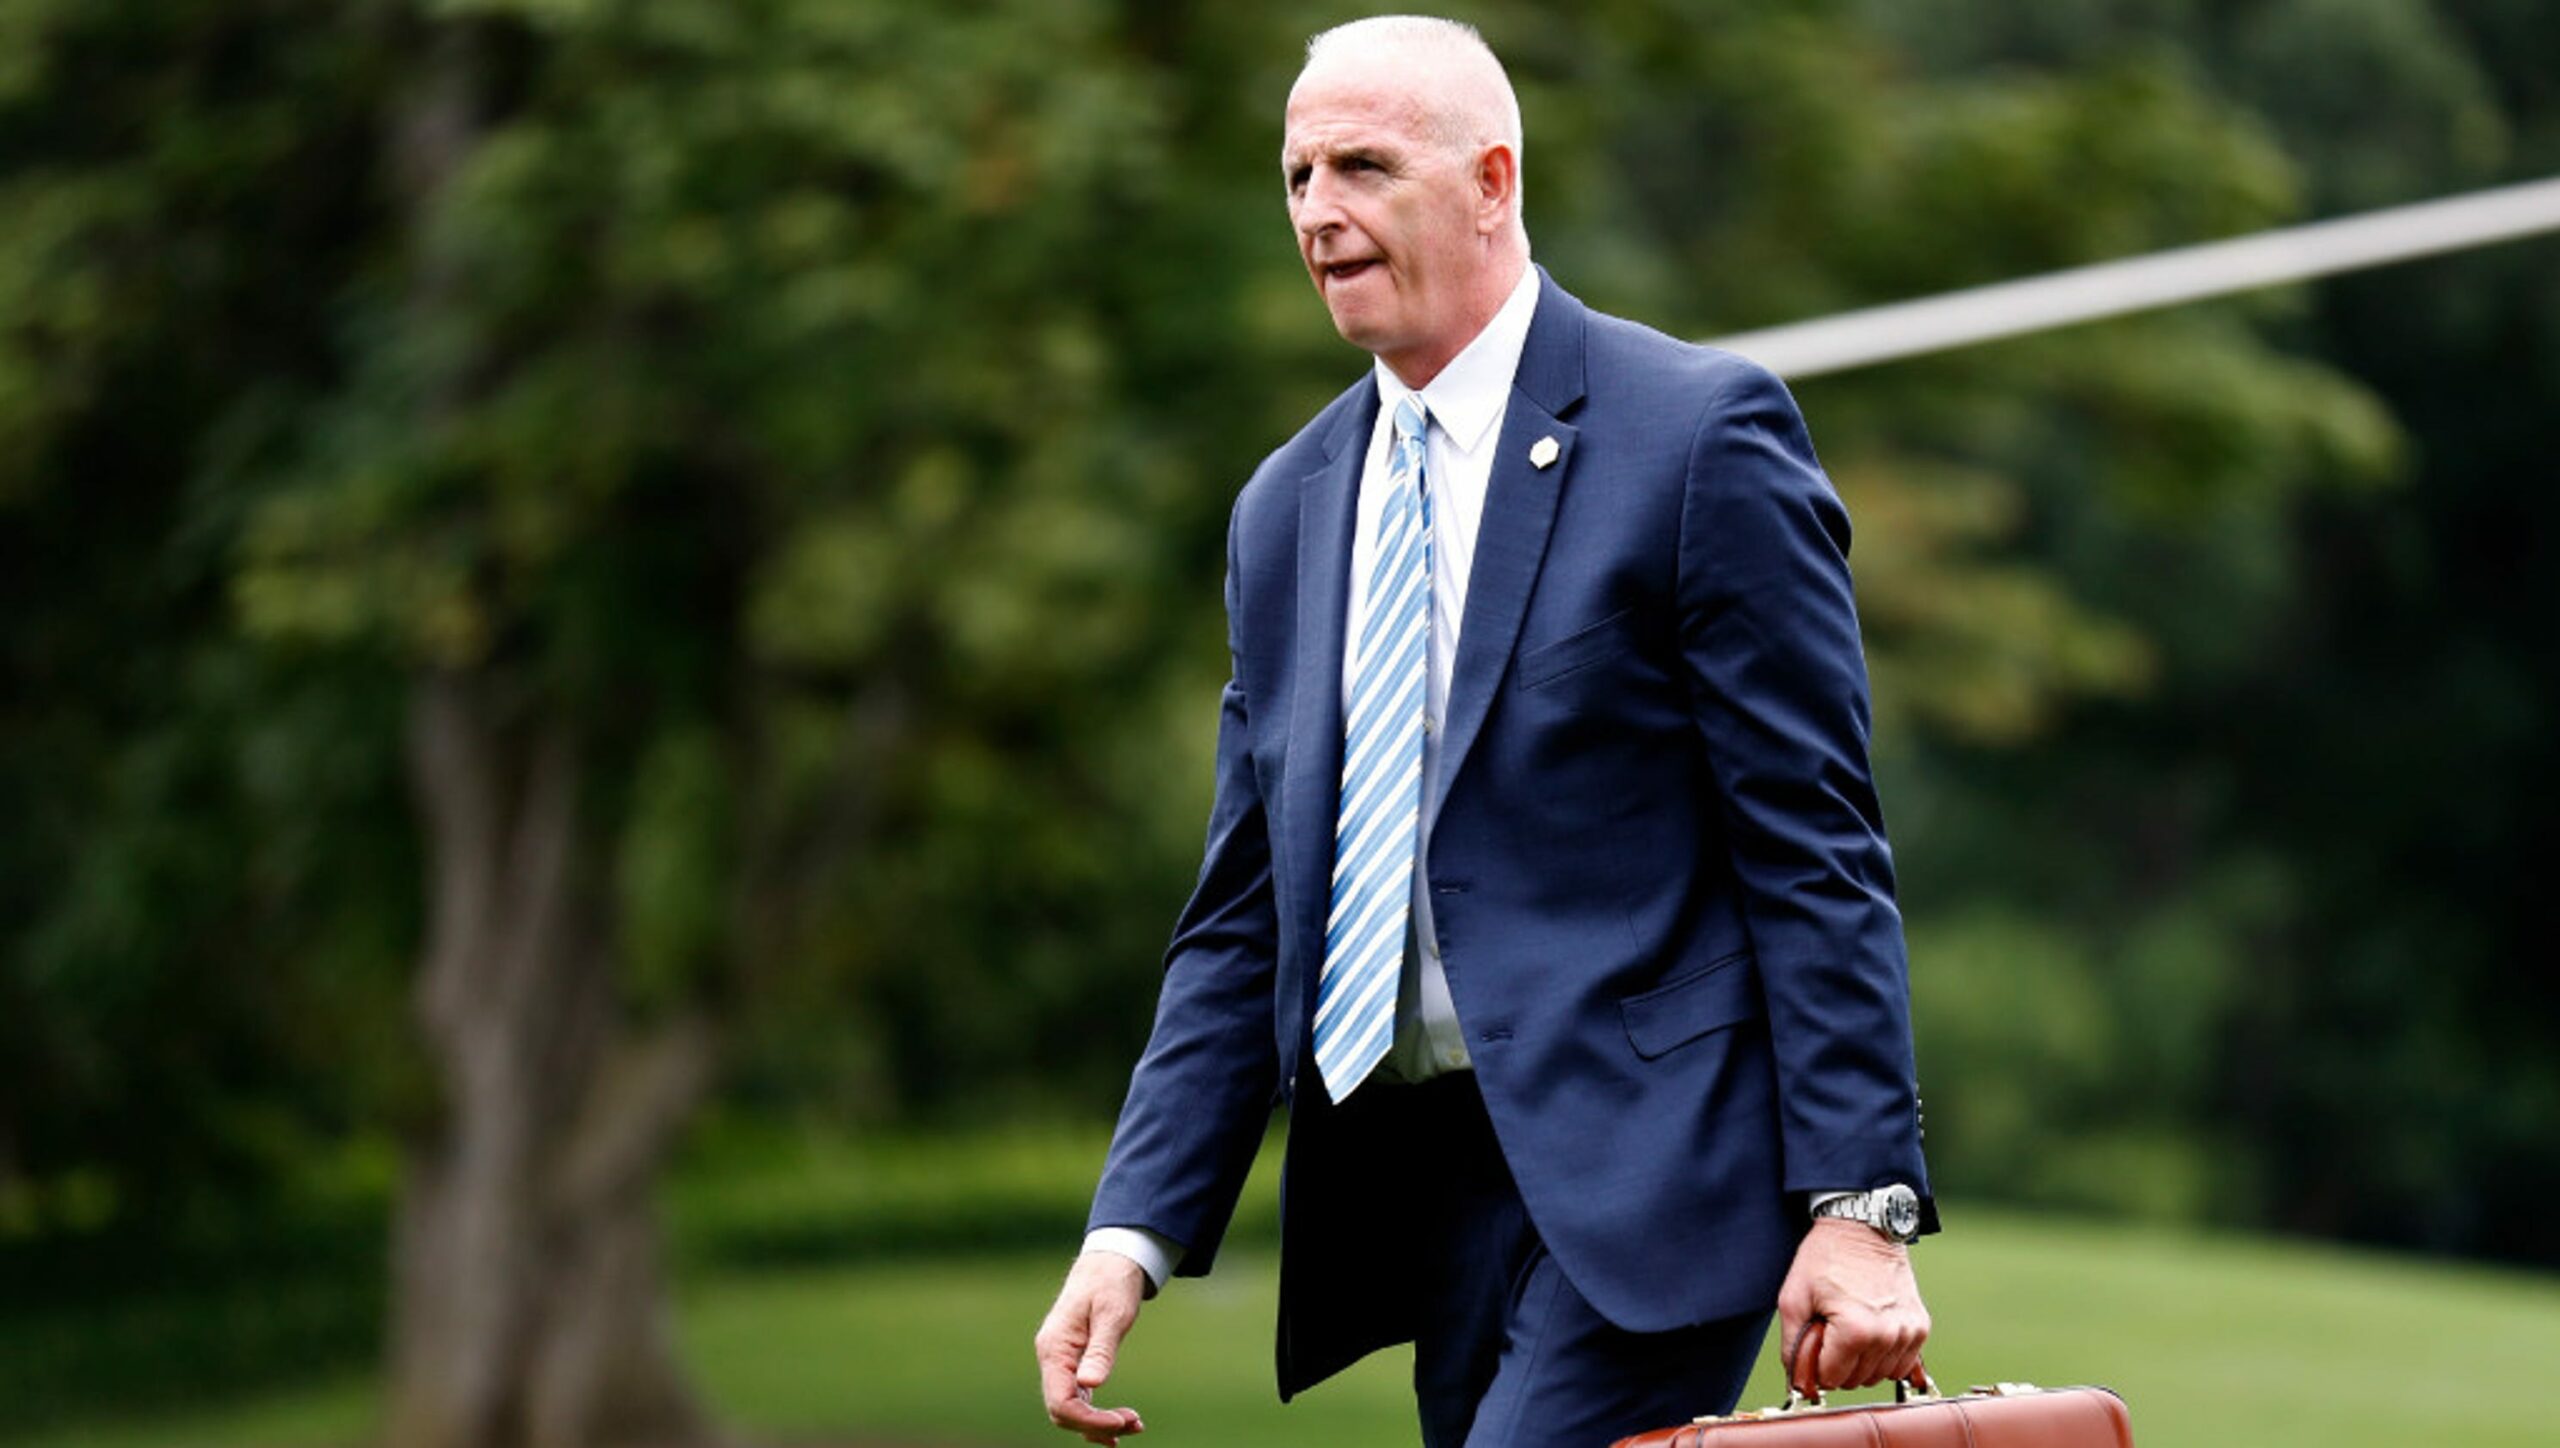 From Security Guard To White House Insider: The Rise Of Keith Schiller